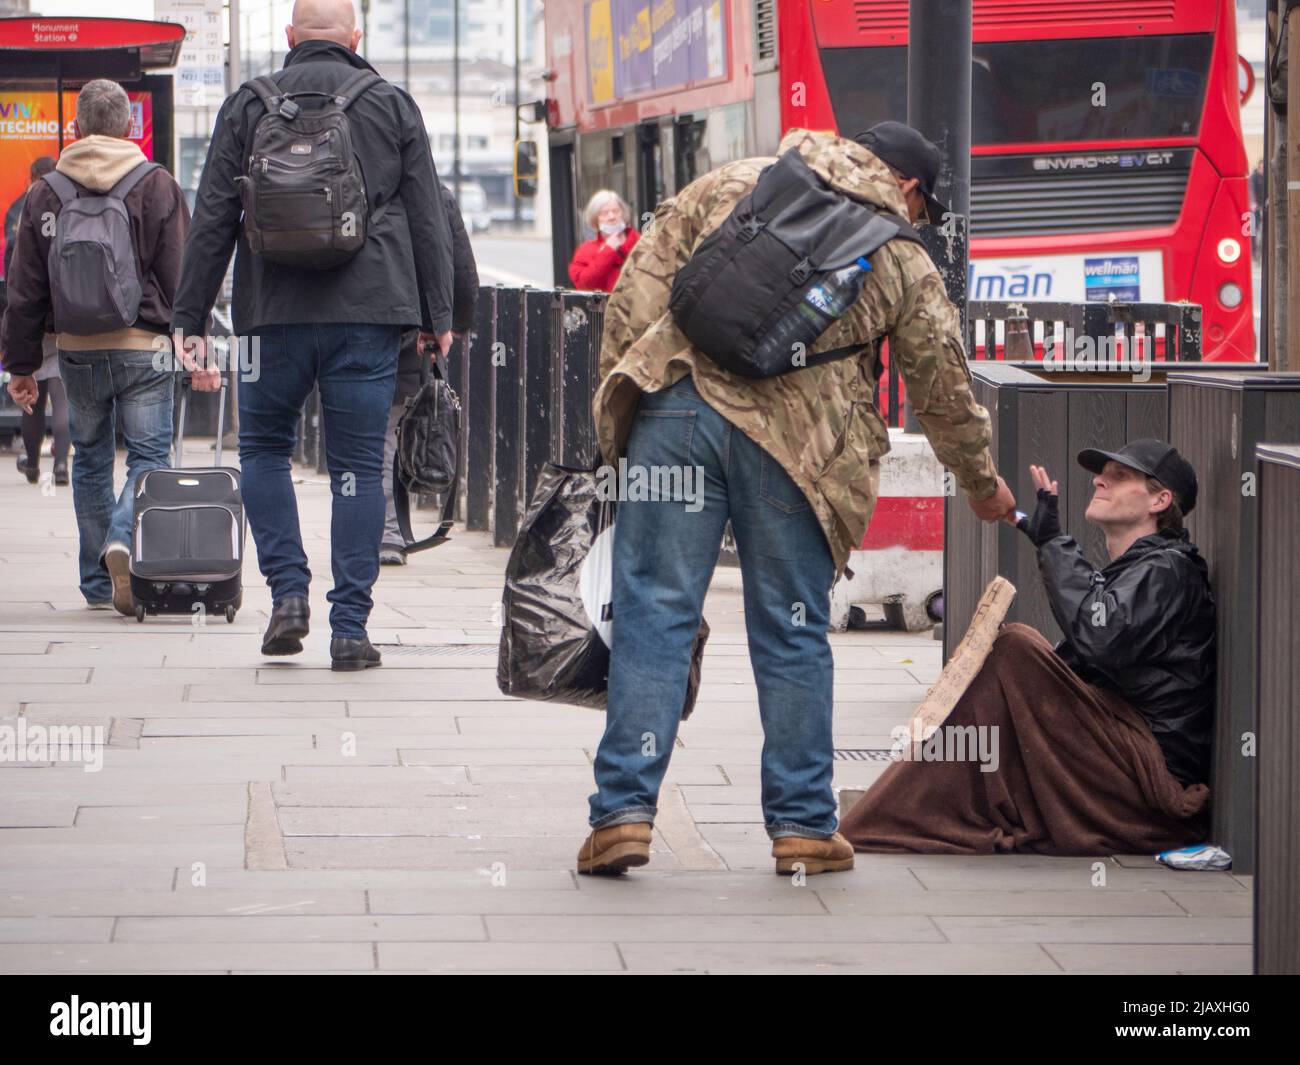 Poverty in London, member of the public bending down to give food to a beggar on London Bridge with blanket and sign Stock Photo